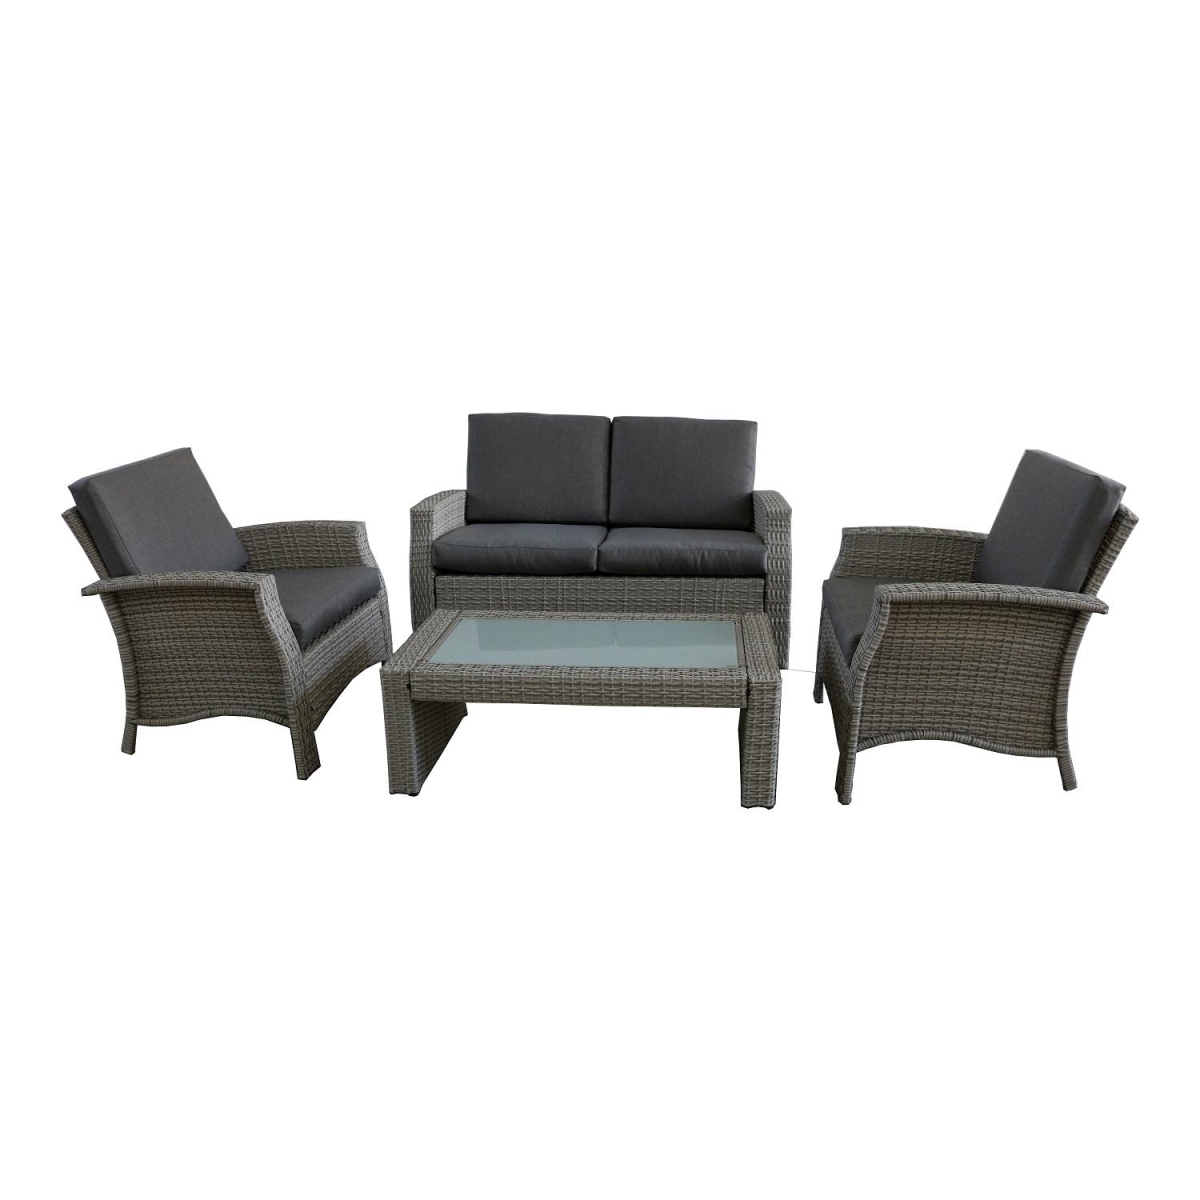 32591330 4 Piece Gray Resin Wicker Outdoor Patio Furniture Set - Gray Cushions